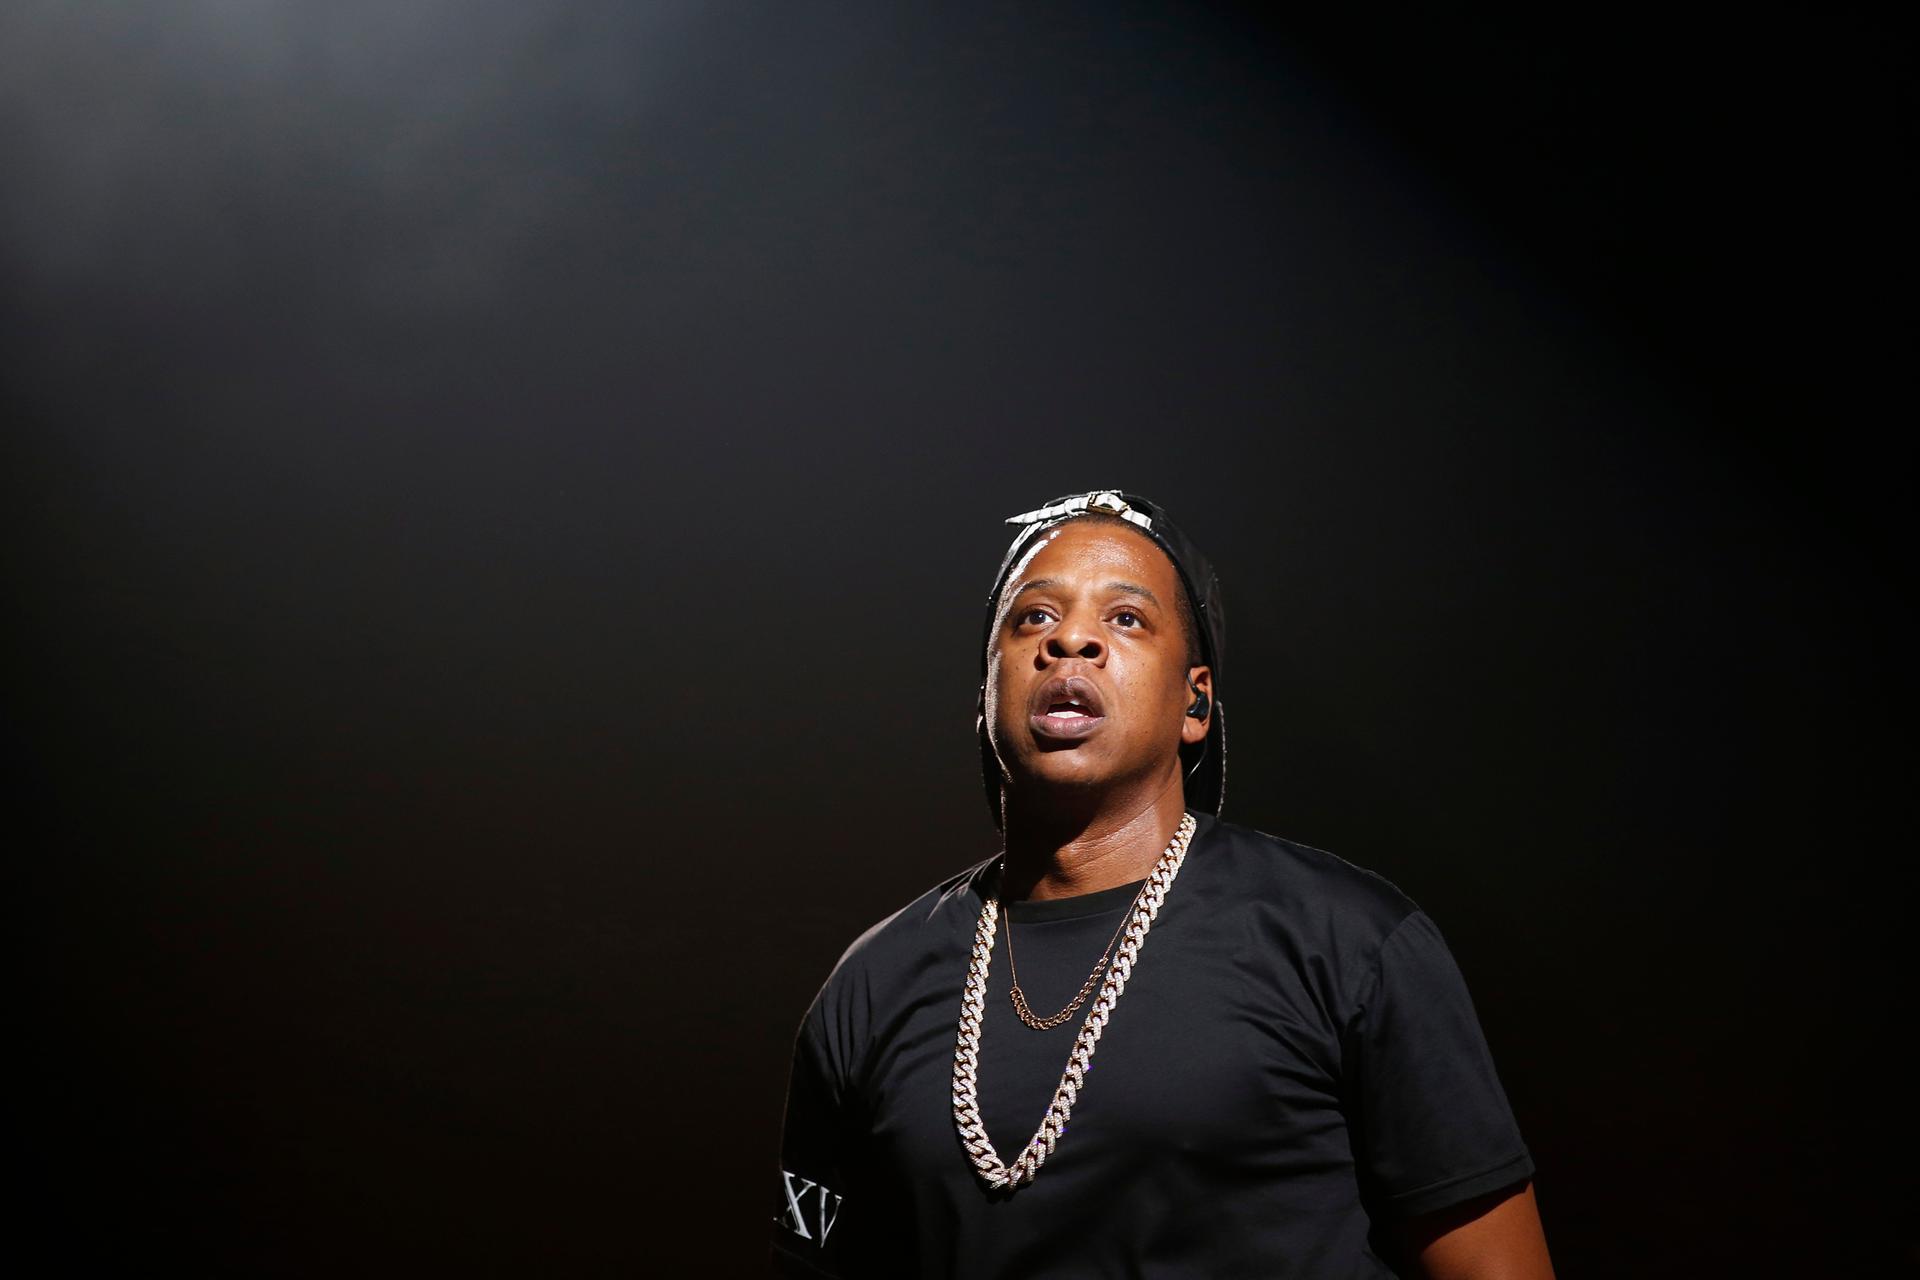 American rapper Jay-Z performs at Bercy stadium in Paris on October 17, 2013.